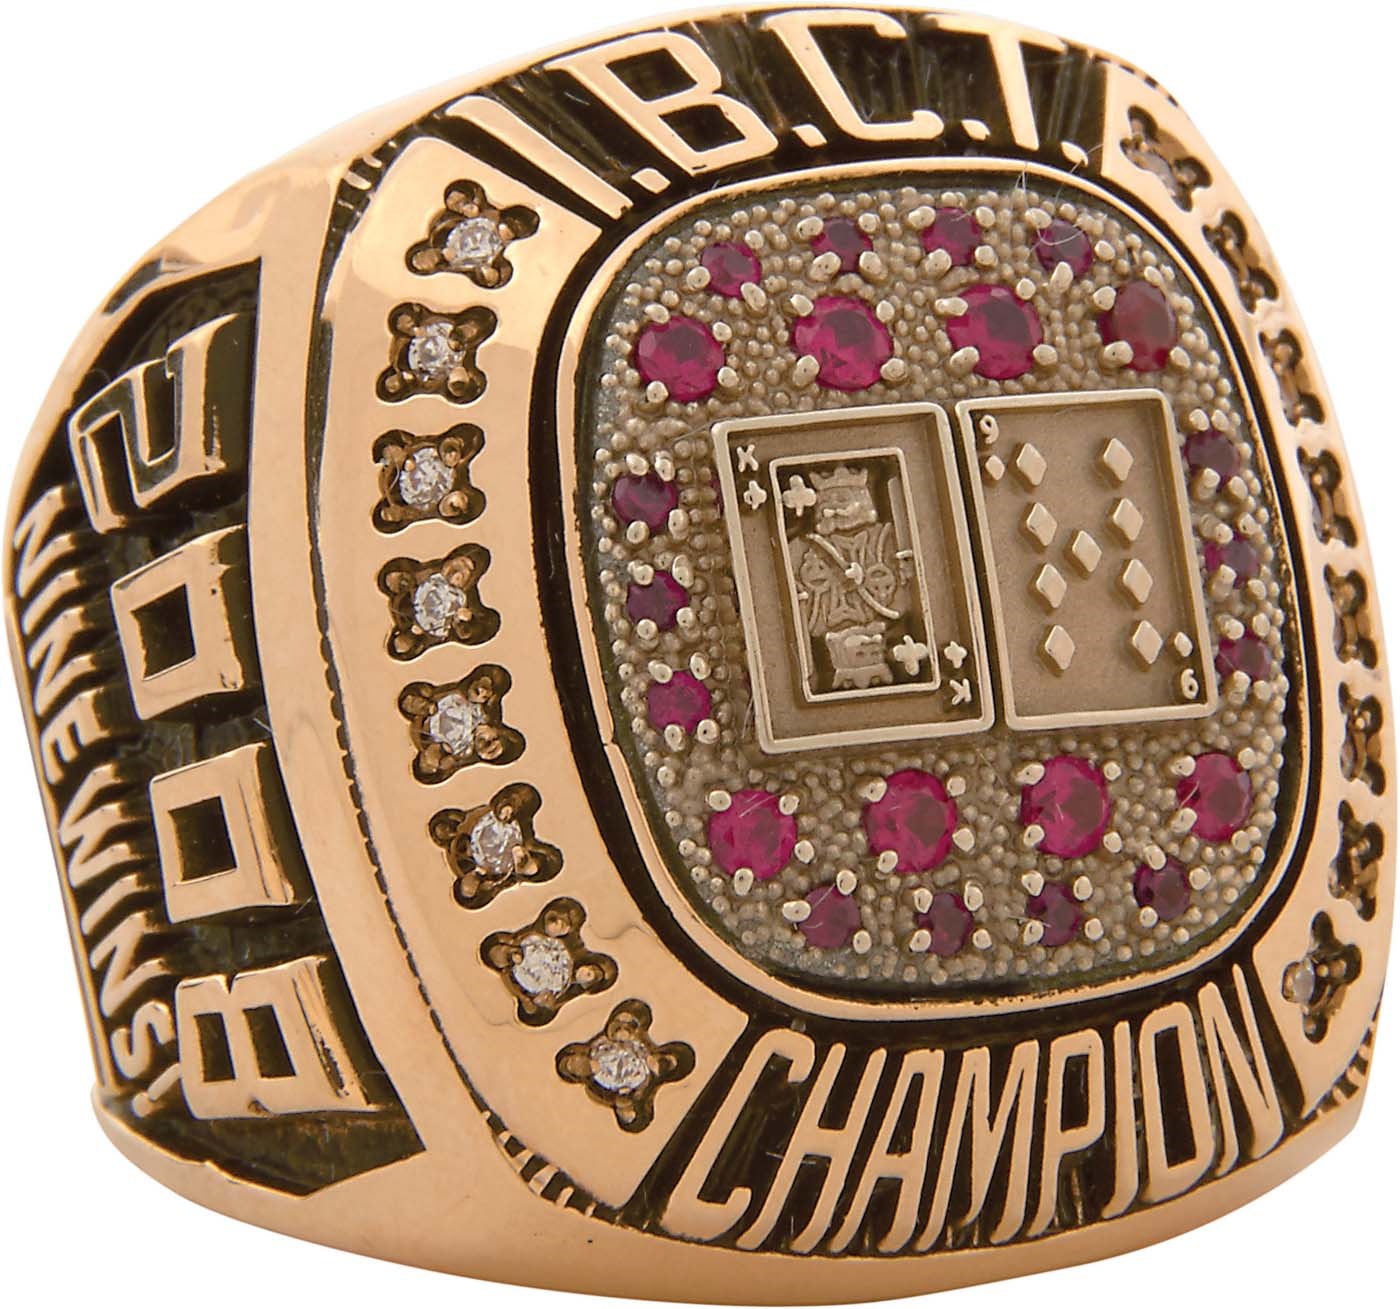 - 2008 Baccarat Championship Ring - Sourced from Tournament Owner